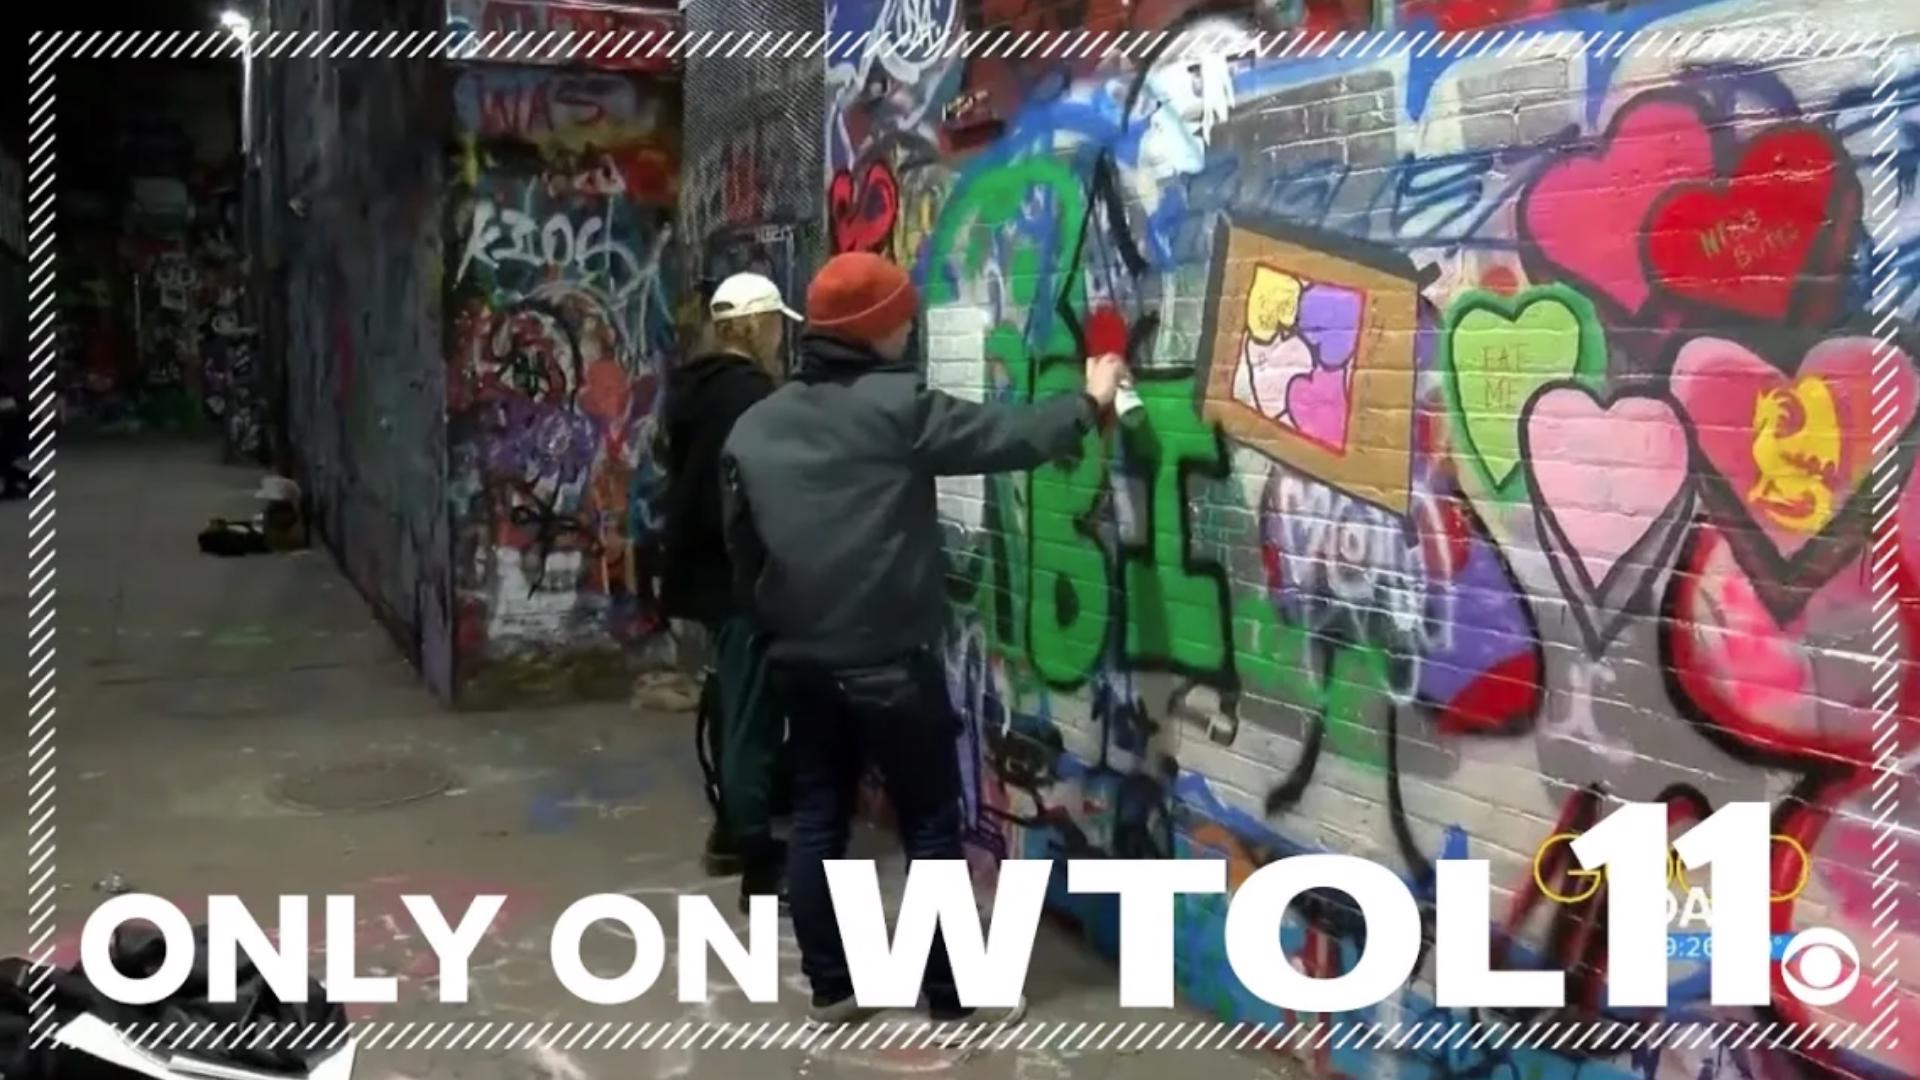 WTOL 11 award-winning photojournalist Joe Cromer takes us to Ann Arbor, where you can find 'Graffiti Alley.'